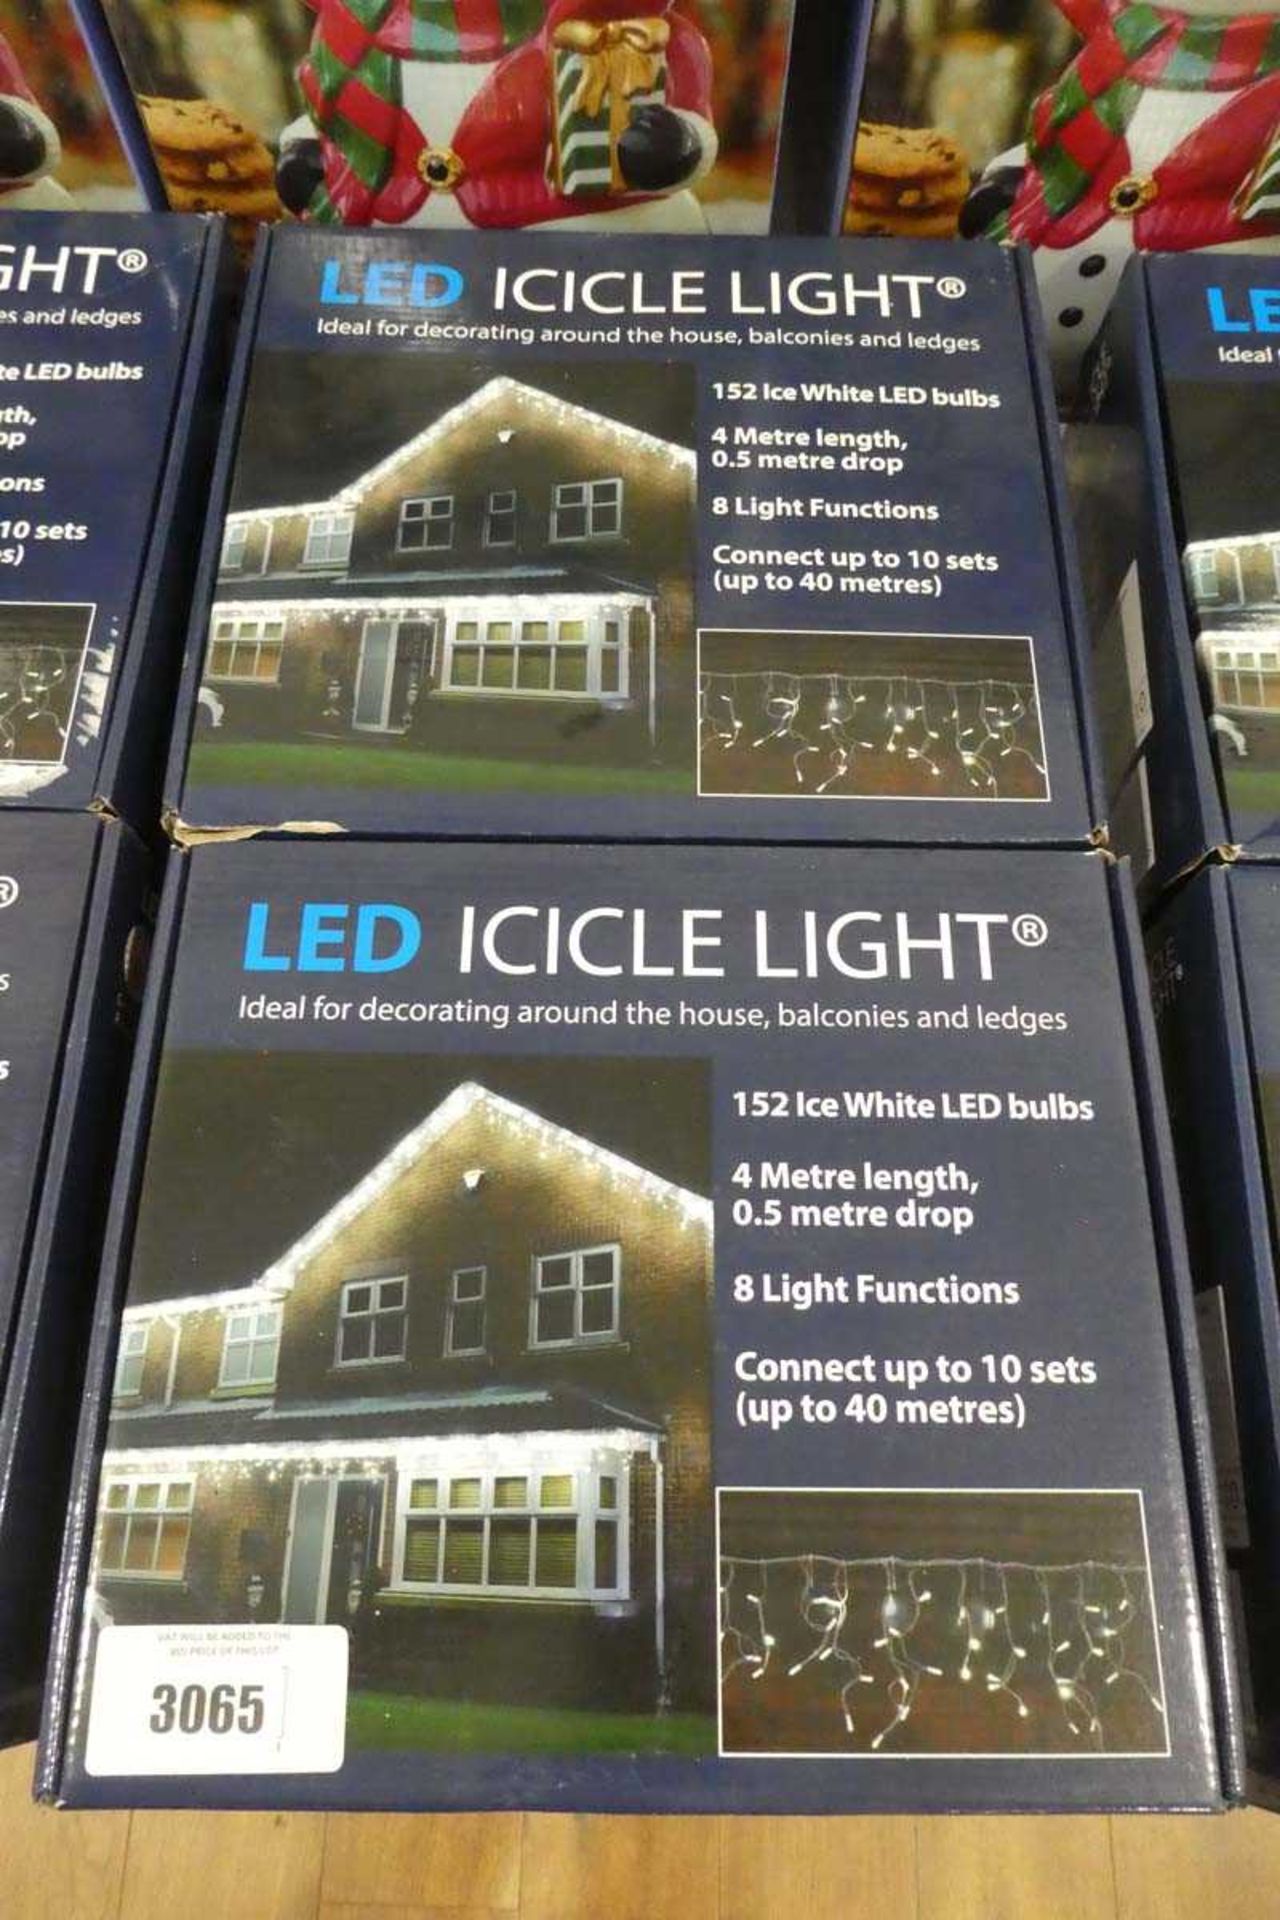 +VAT 2 boxed sets of LED icicle lights (4m length, 0.5m drop, 8 light functions)